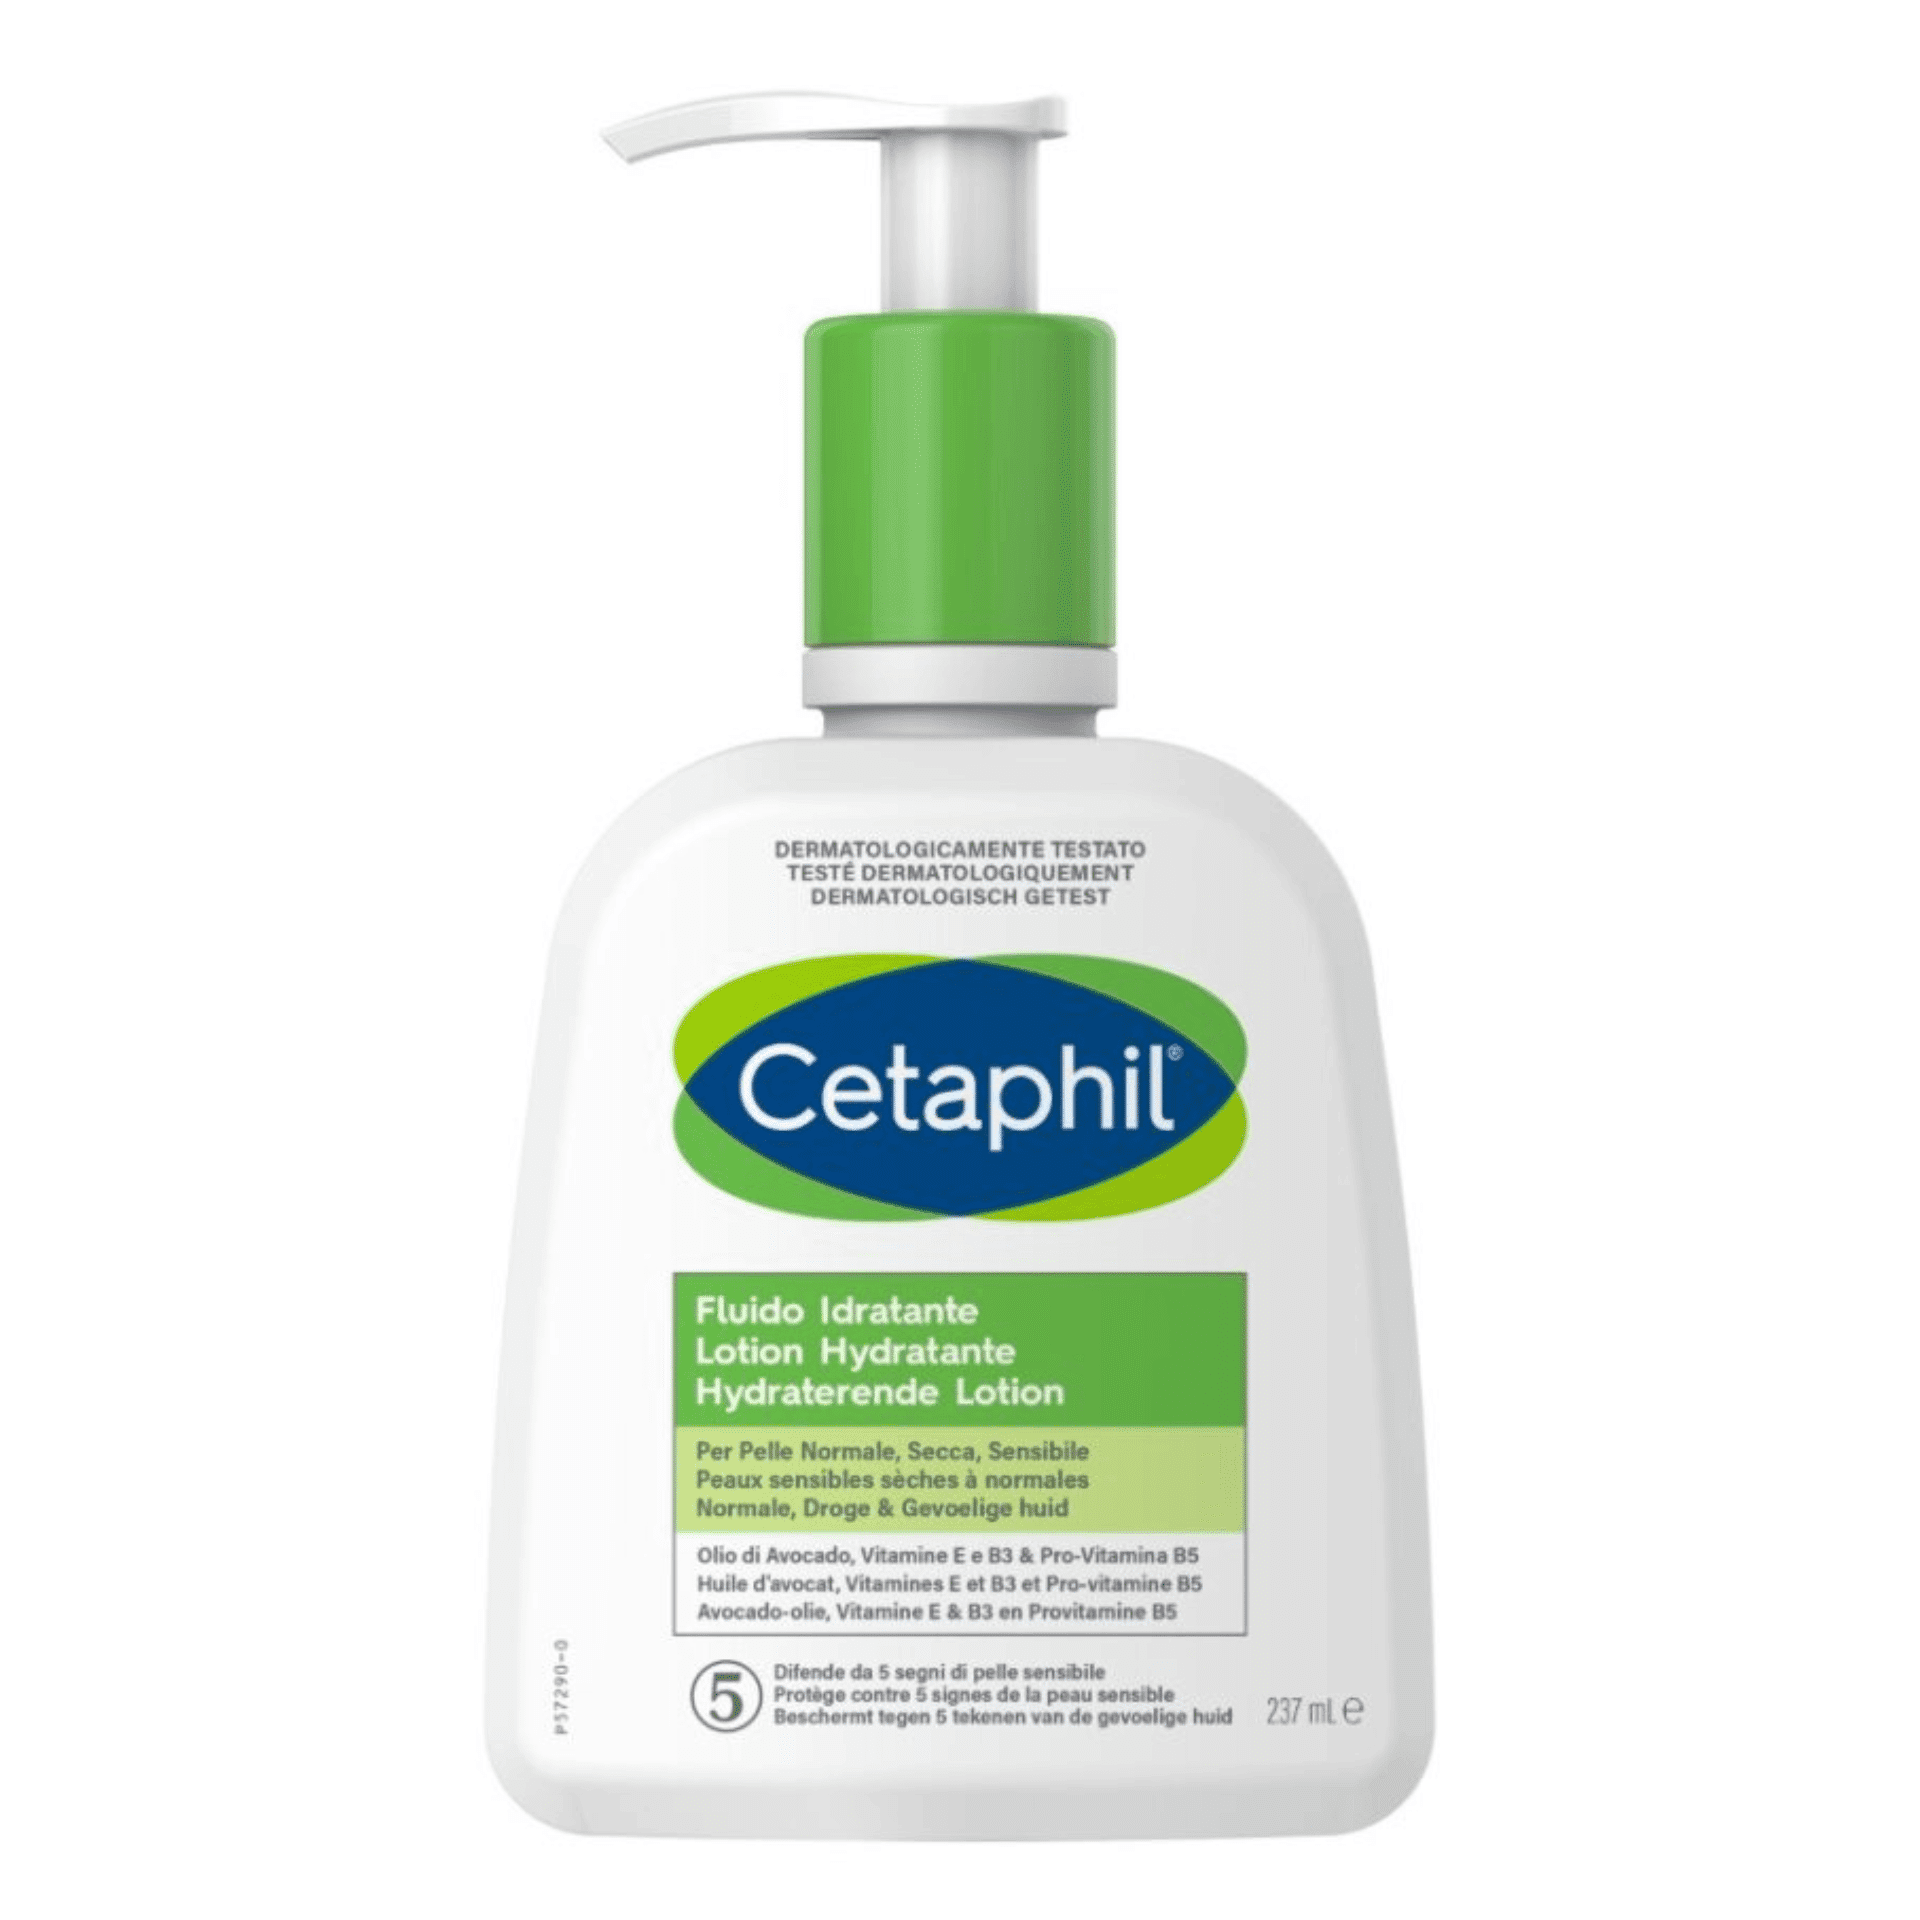 Cetaphil Hydraterende Lotion